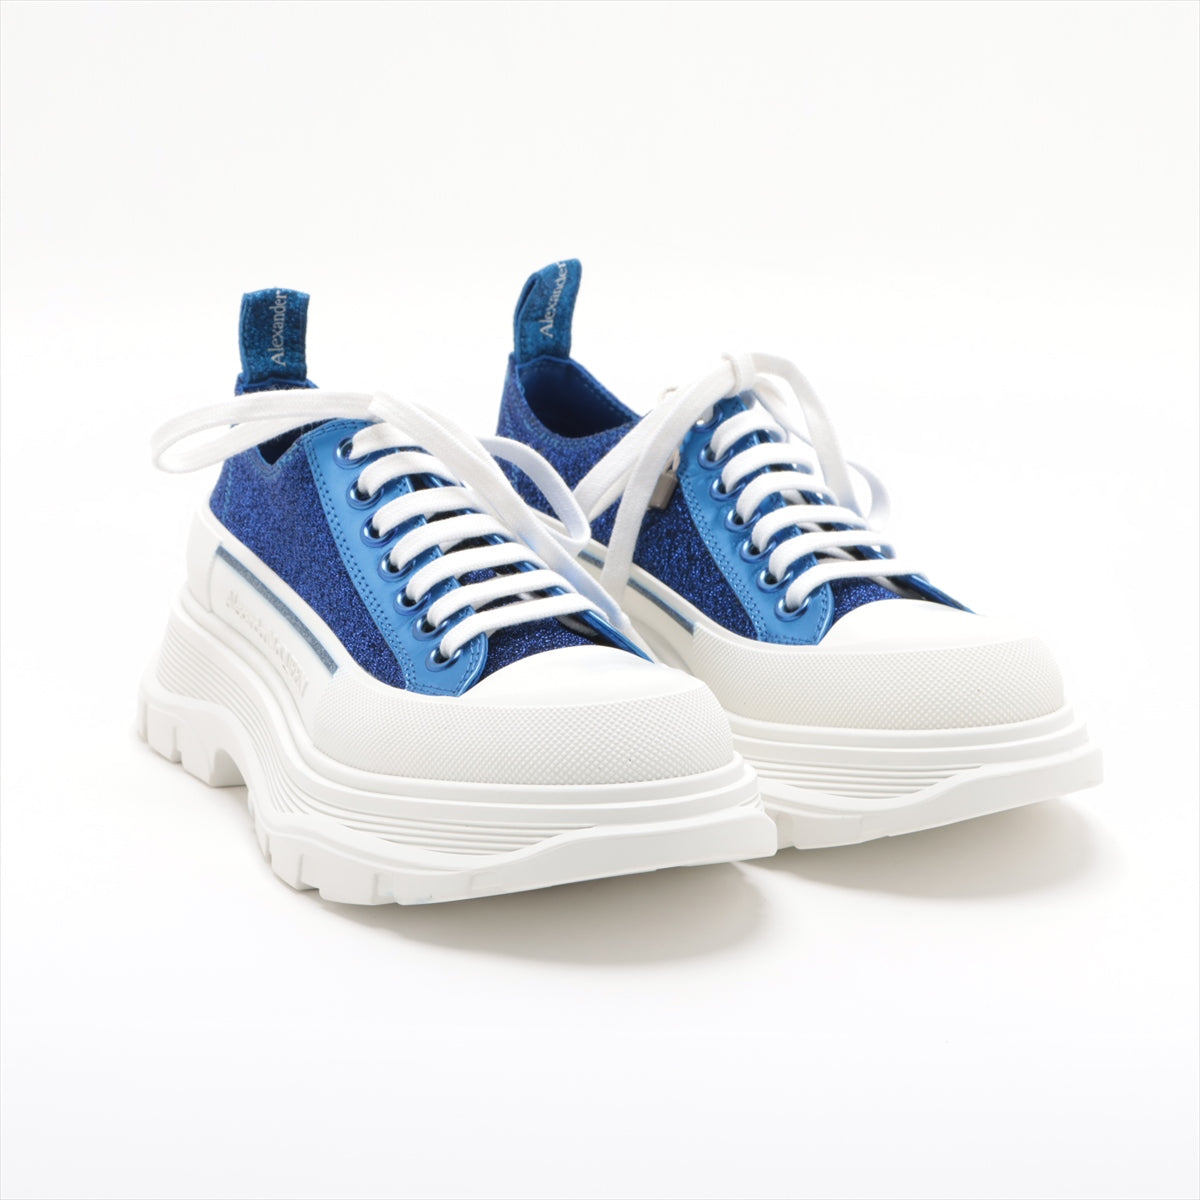 Alexander McQueen Fabric Trainers 37  Blue x White 685707 Glitter Change Himo